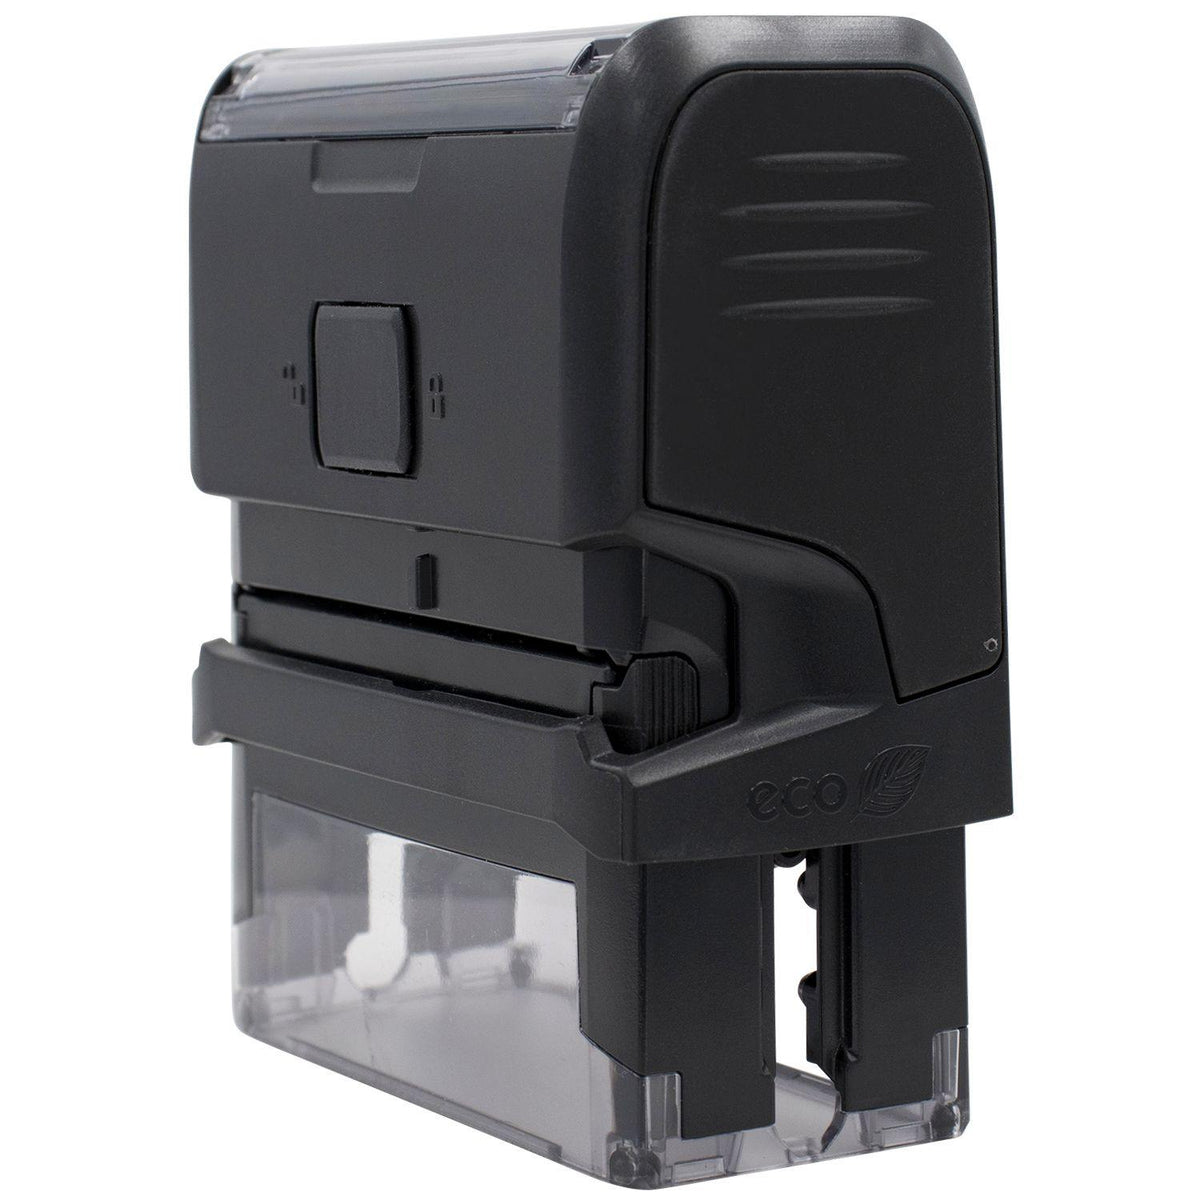 Side View of Large Self-Inking Amortizado Stamp at an Angle